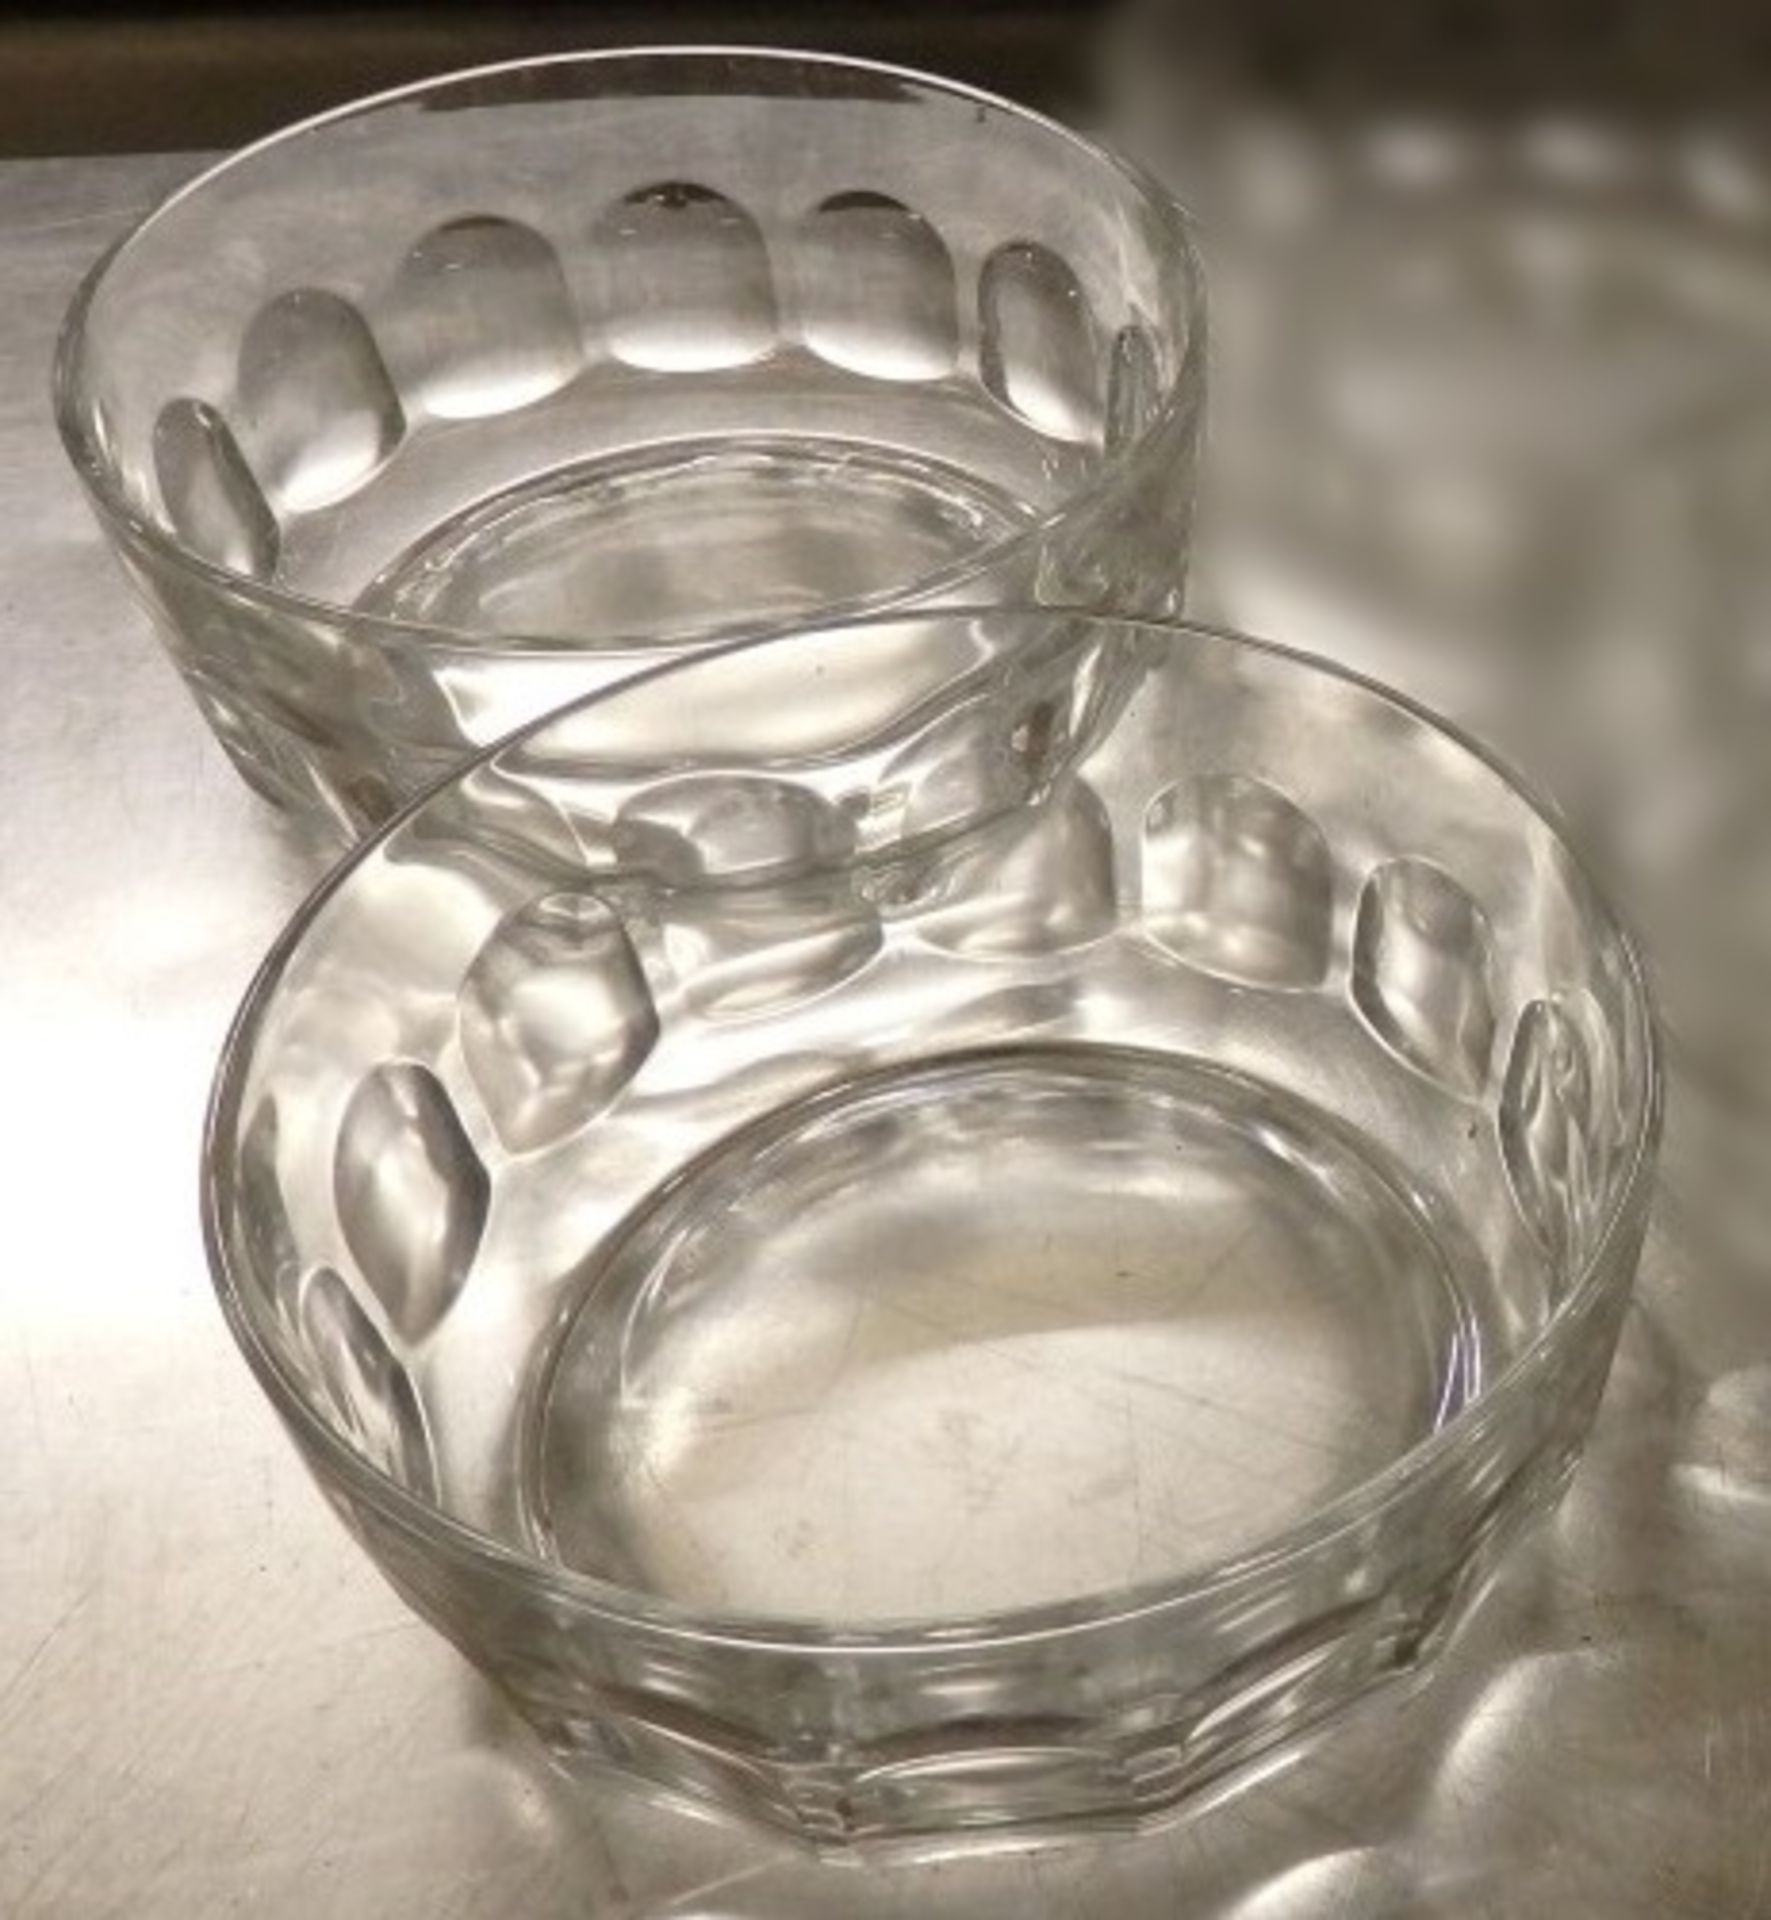 2 x Arcoroc France Clear Glass Thumbprint Salad Serving Bowls - Presented In Good Clean